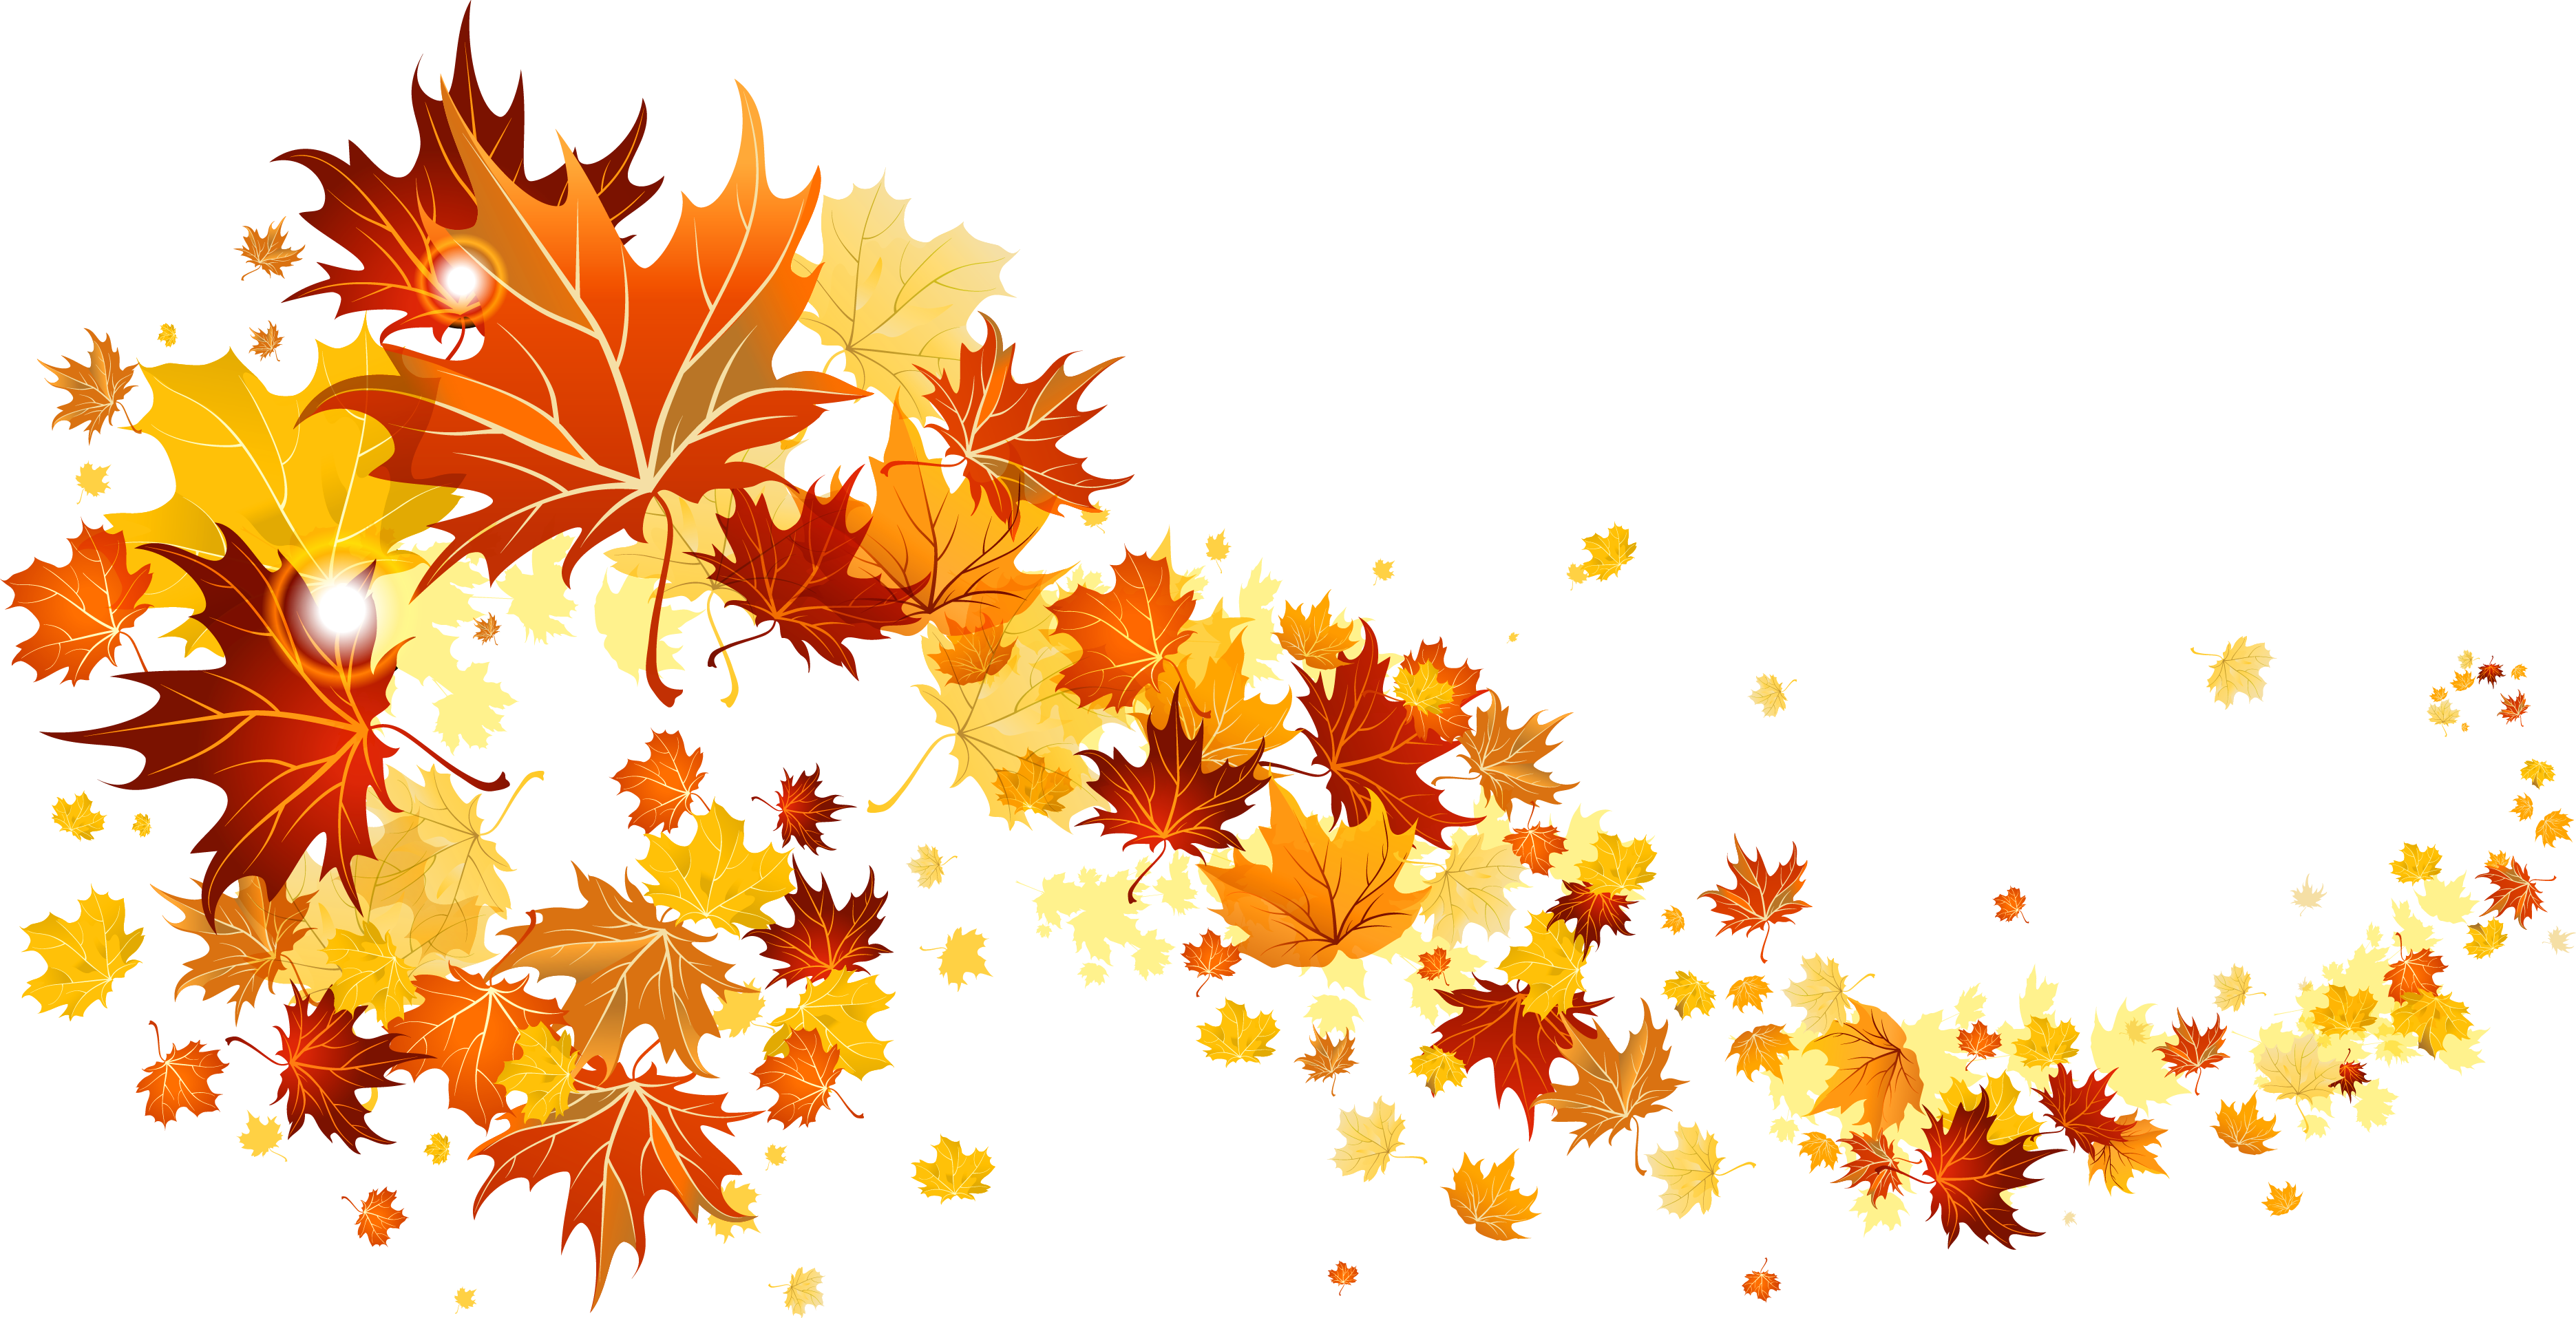 Falling leaves transparent png. Wet clipart slips and falls